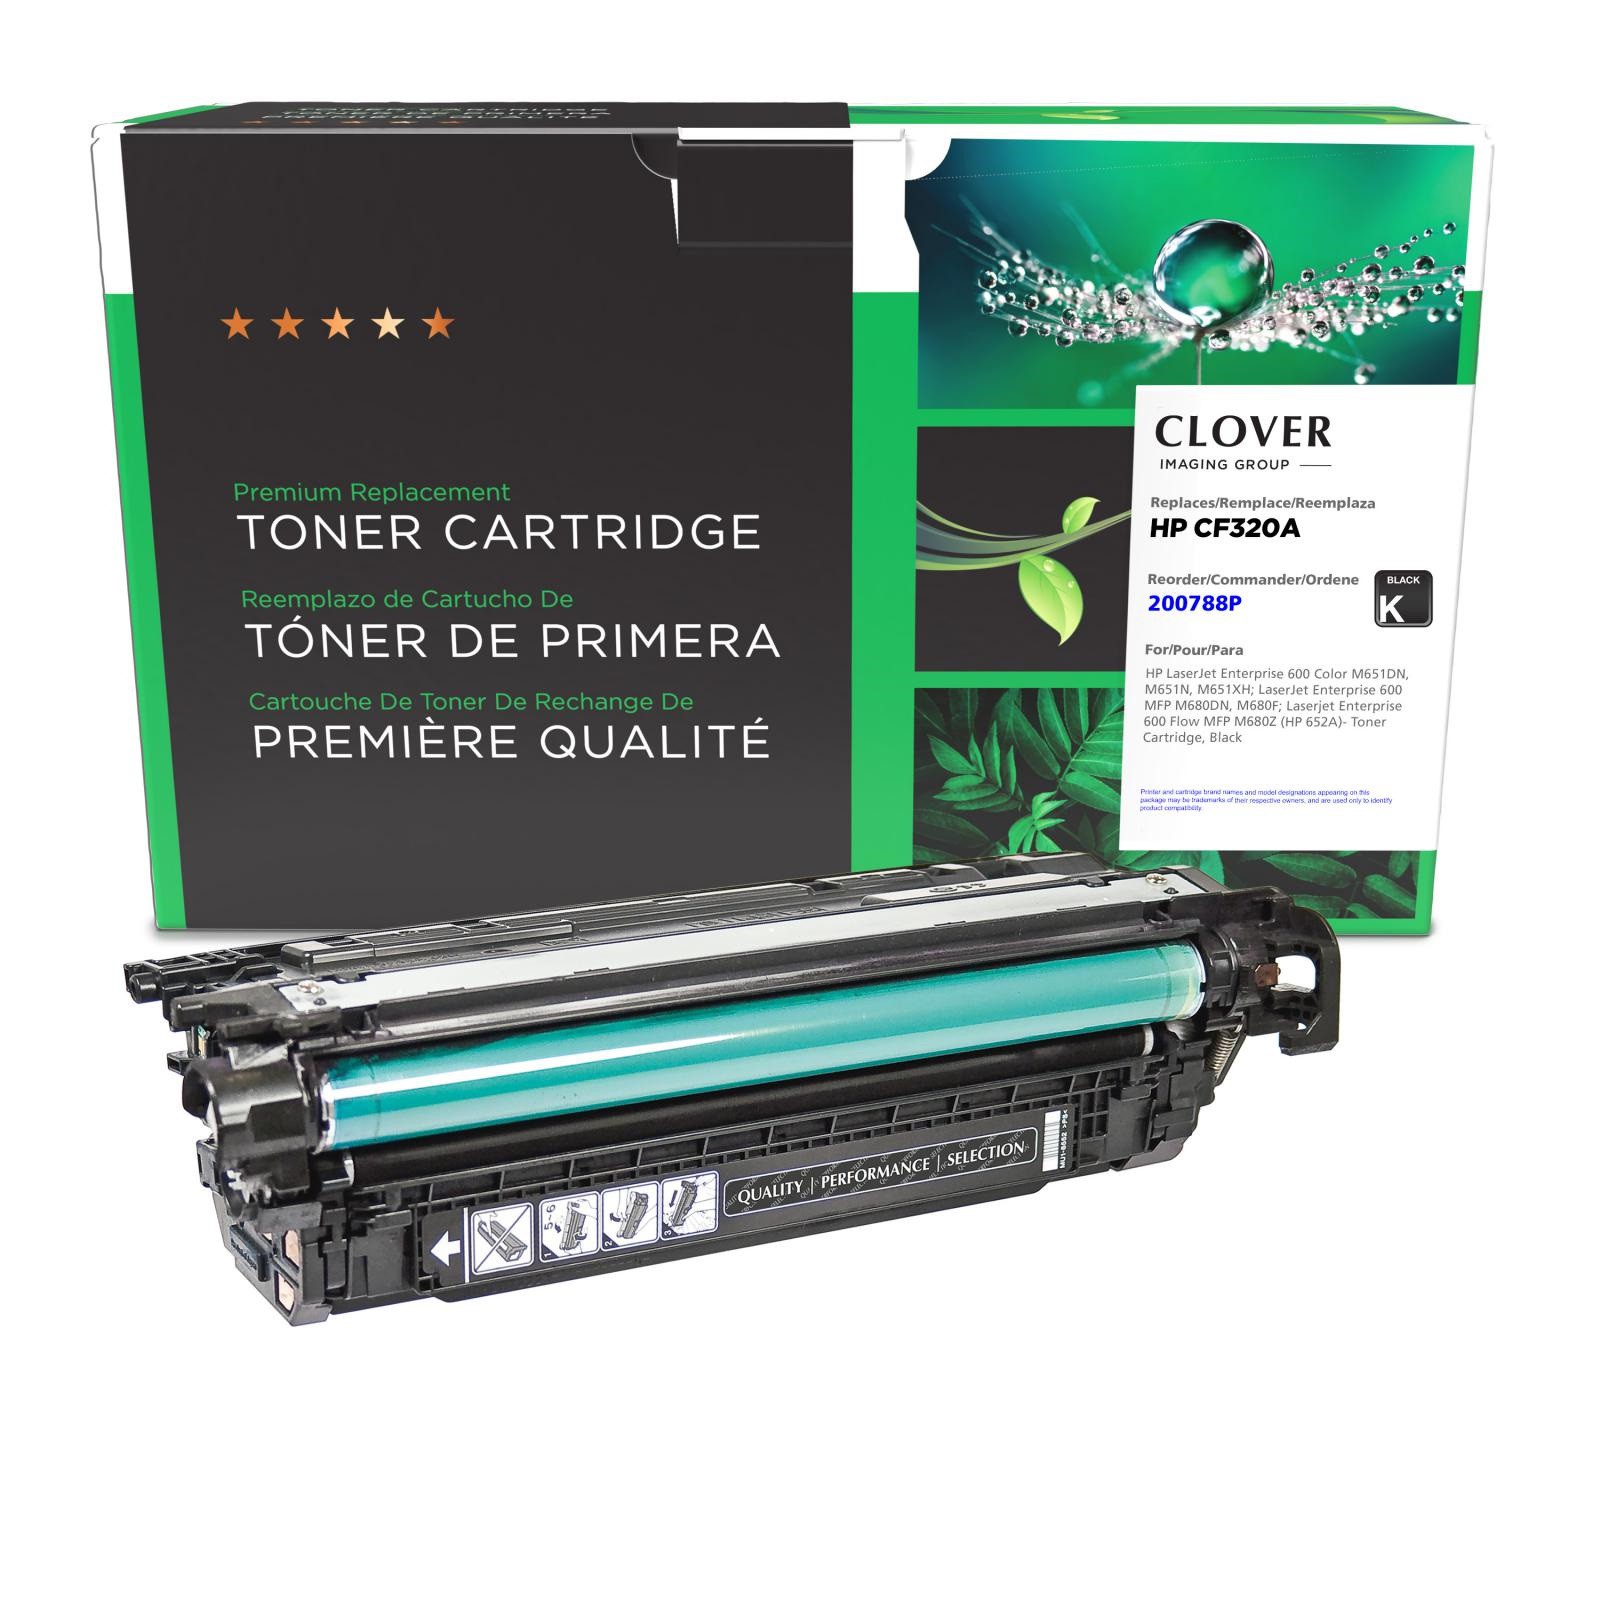 Clover+Imaging+Remanufactured+Black+Toner+Cartridge+for+HP+CF320A+%28HP+652A%29